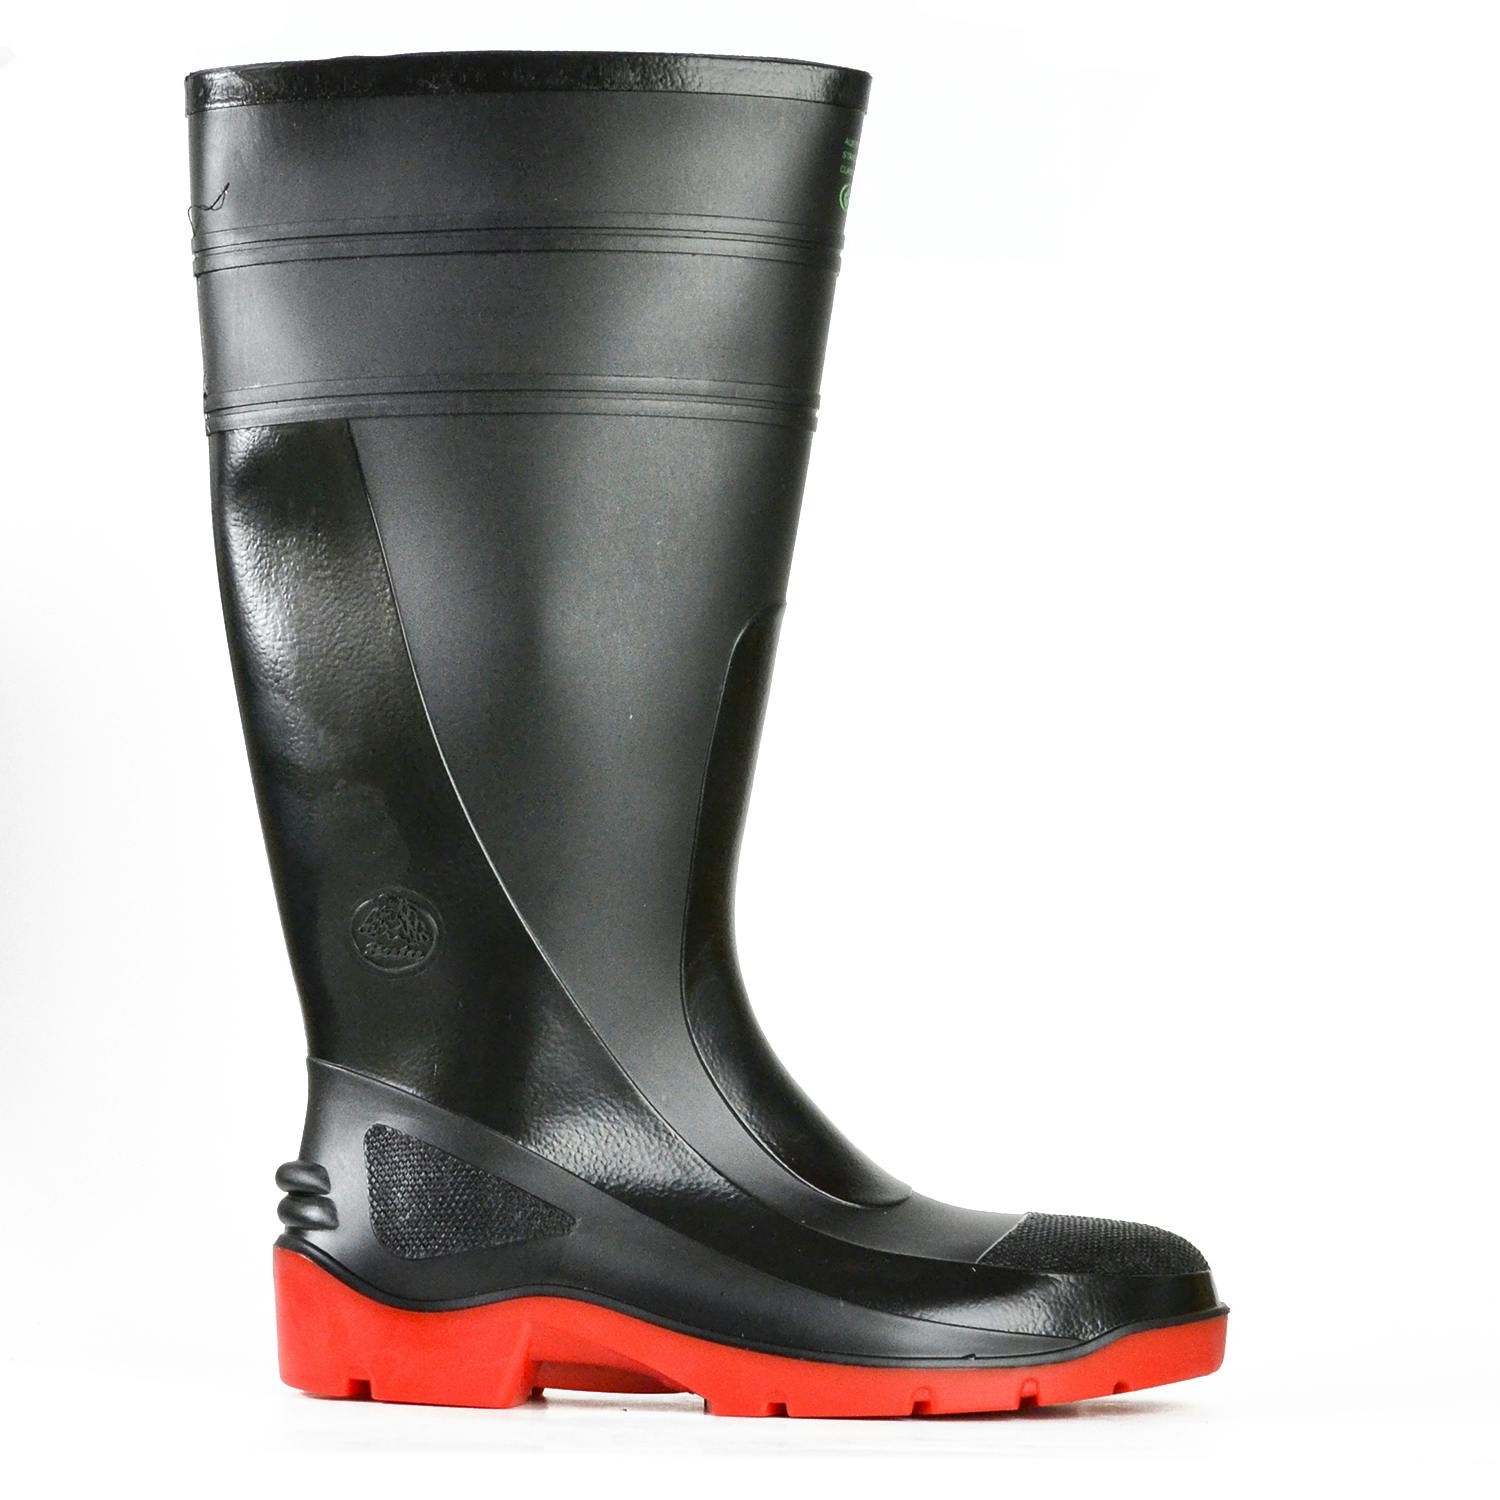 Bata Industrials Utility-ST - Black / Red PVC 400Mm Safety Toe Boot (PVC Utility)_1